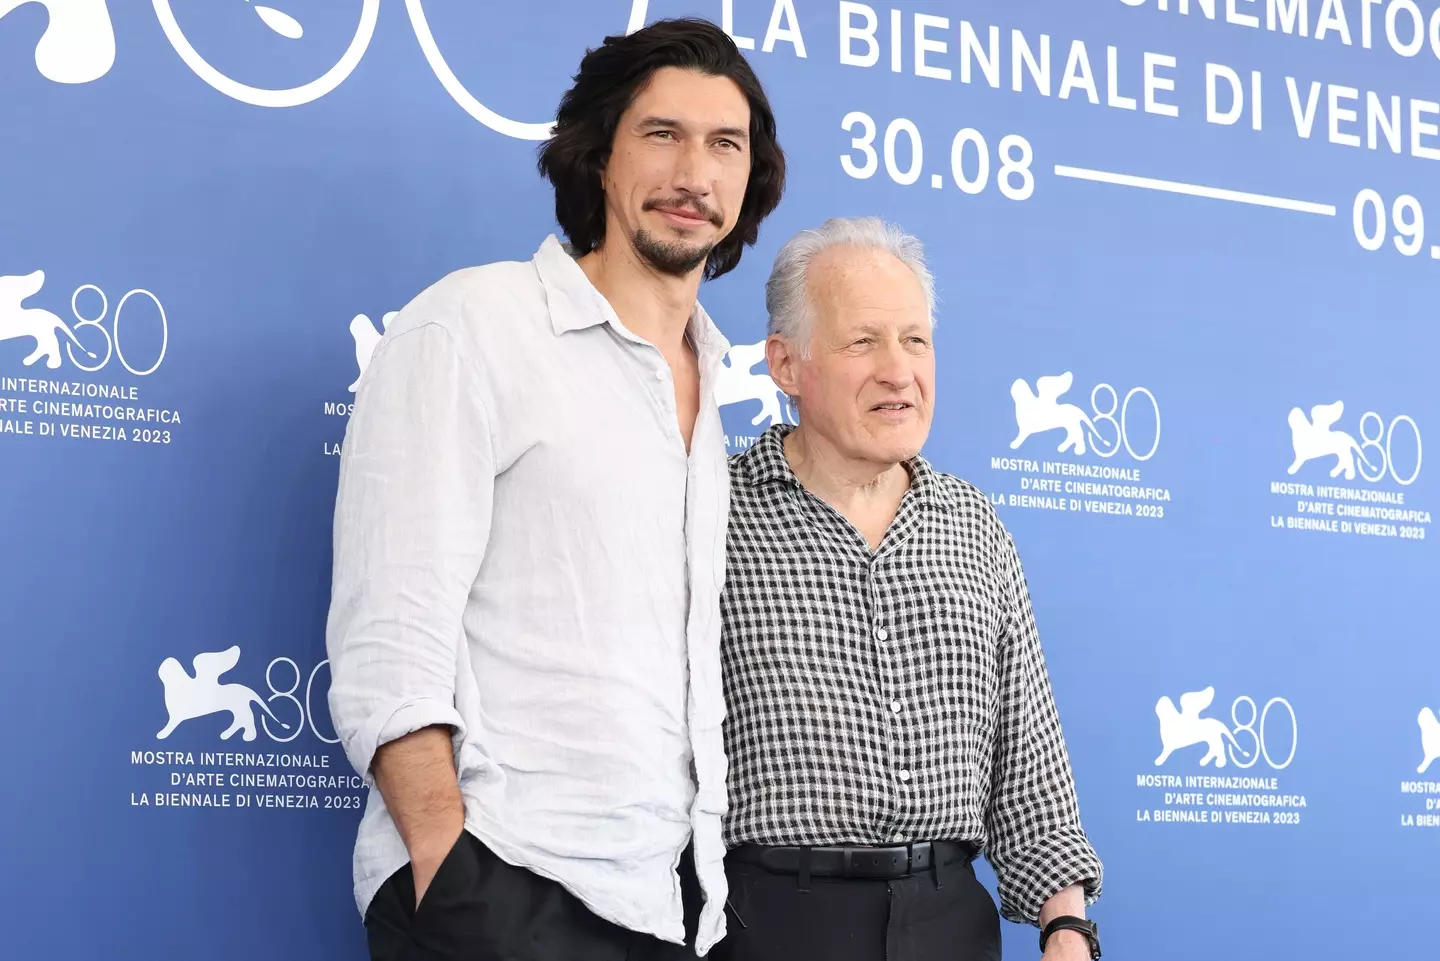 Adam Driver and director Michael Mann attend a photocall for the movie 'Ferrari'.